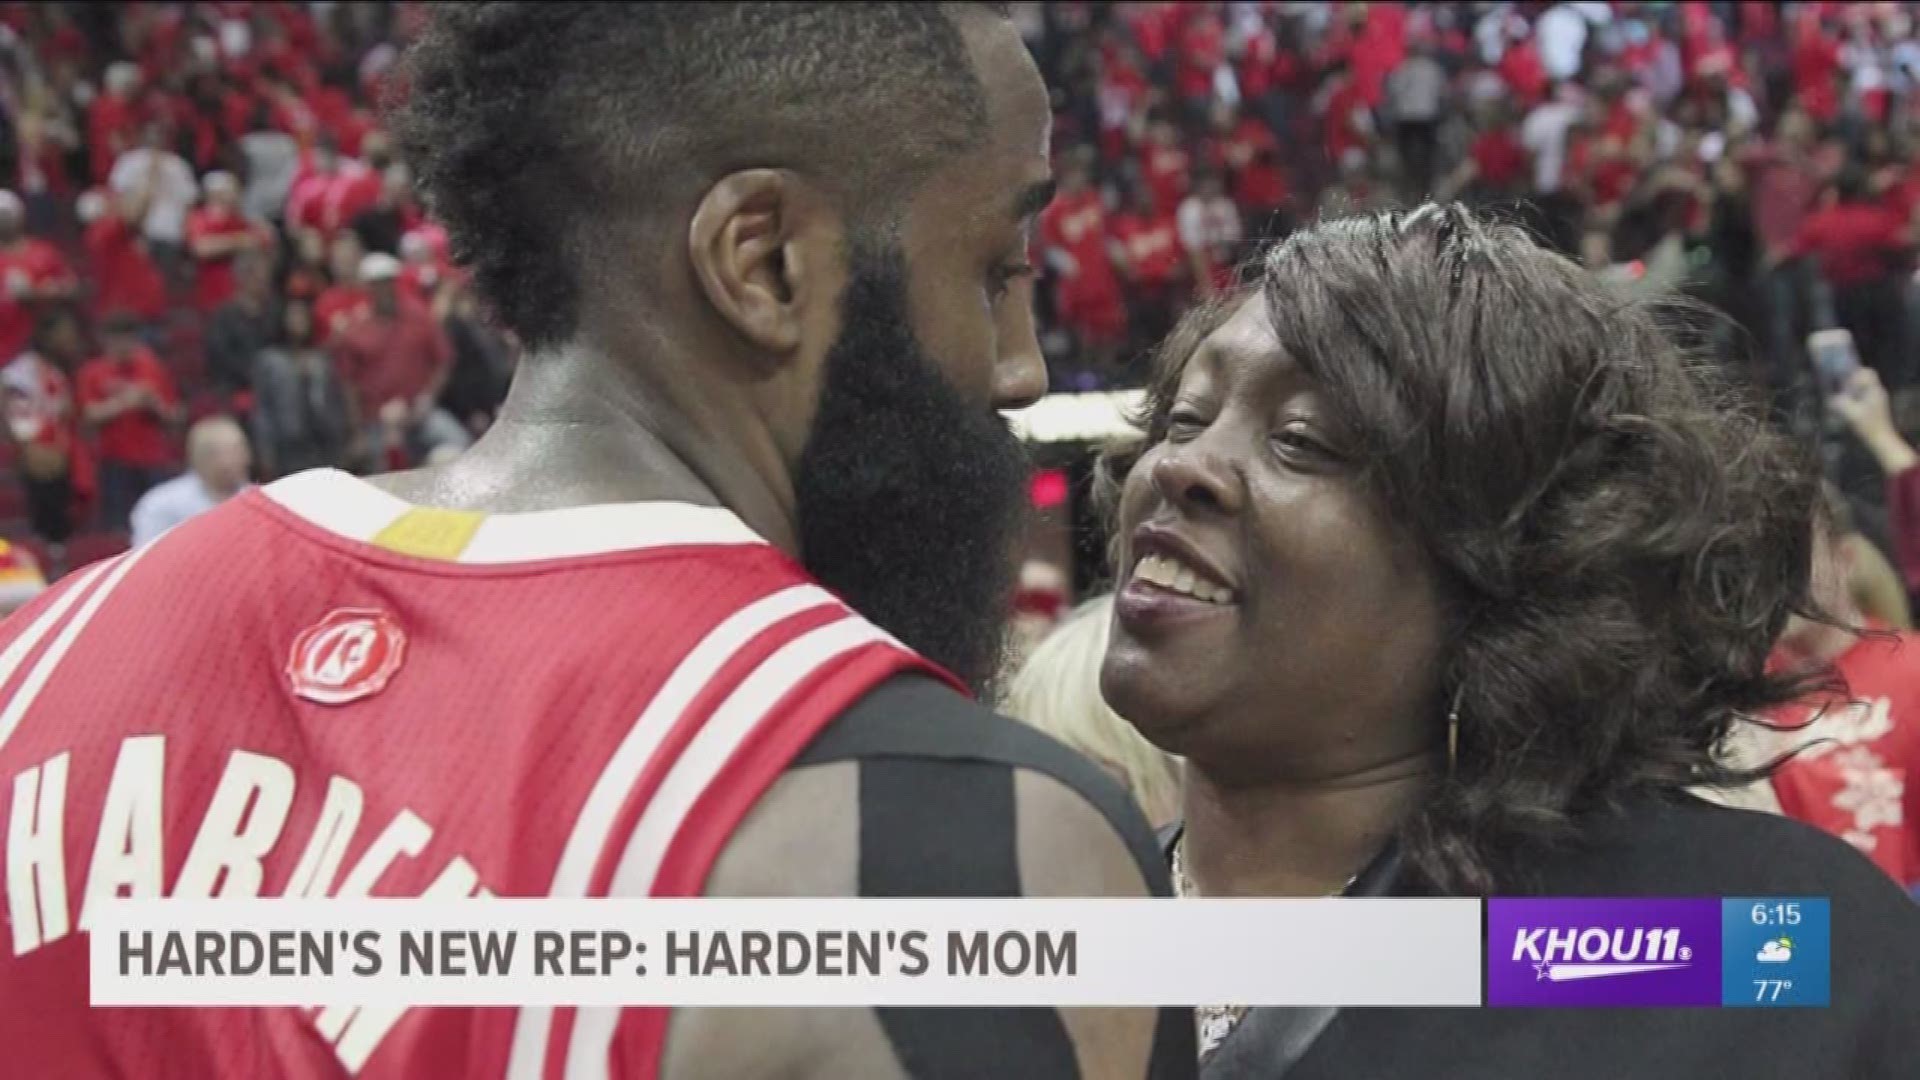 Family knows best, apparently. James Harden has dropped his agent and will now be represented by his mother, according to the Houston Business Journal.